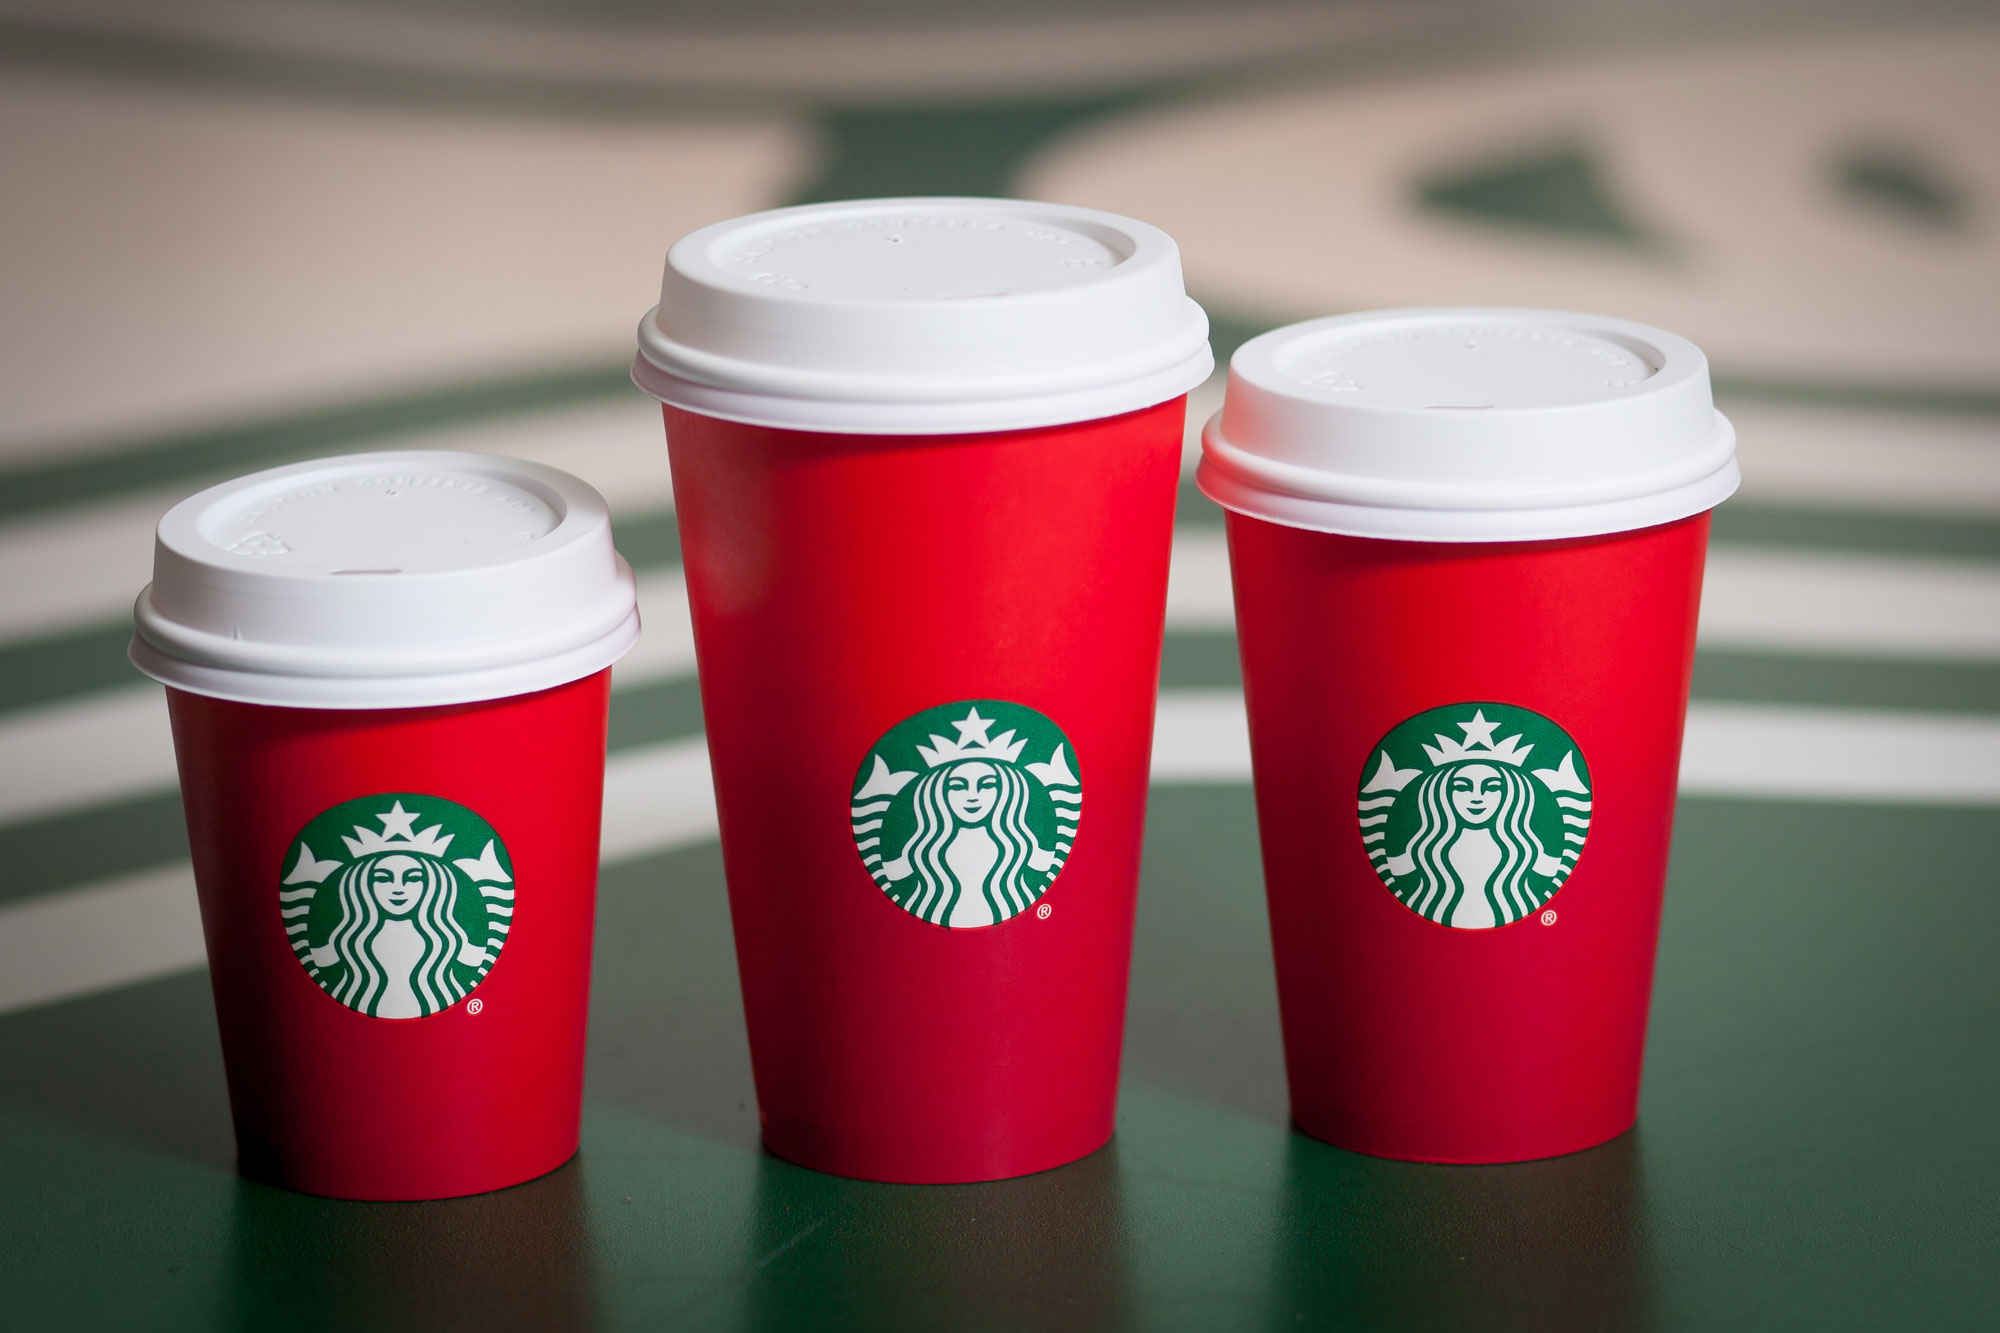 Starbucks’ plain red holiday cups rile some Christians online